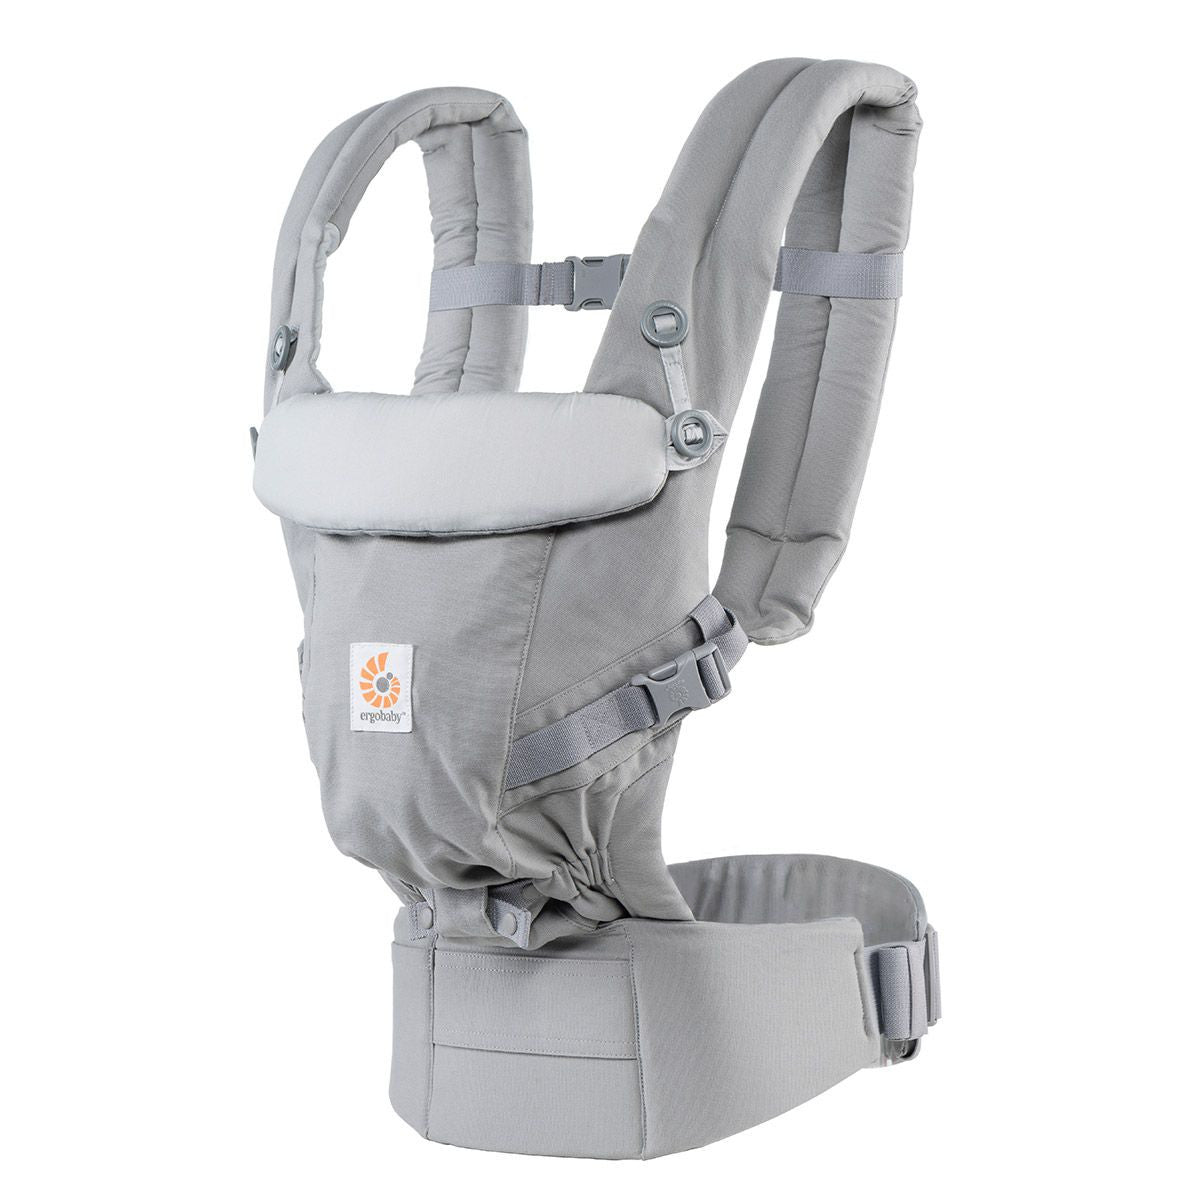 Ergobaby 3 Position ADAPT Carrier - PeppyParents.com